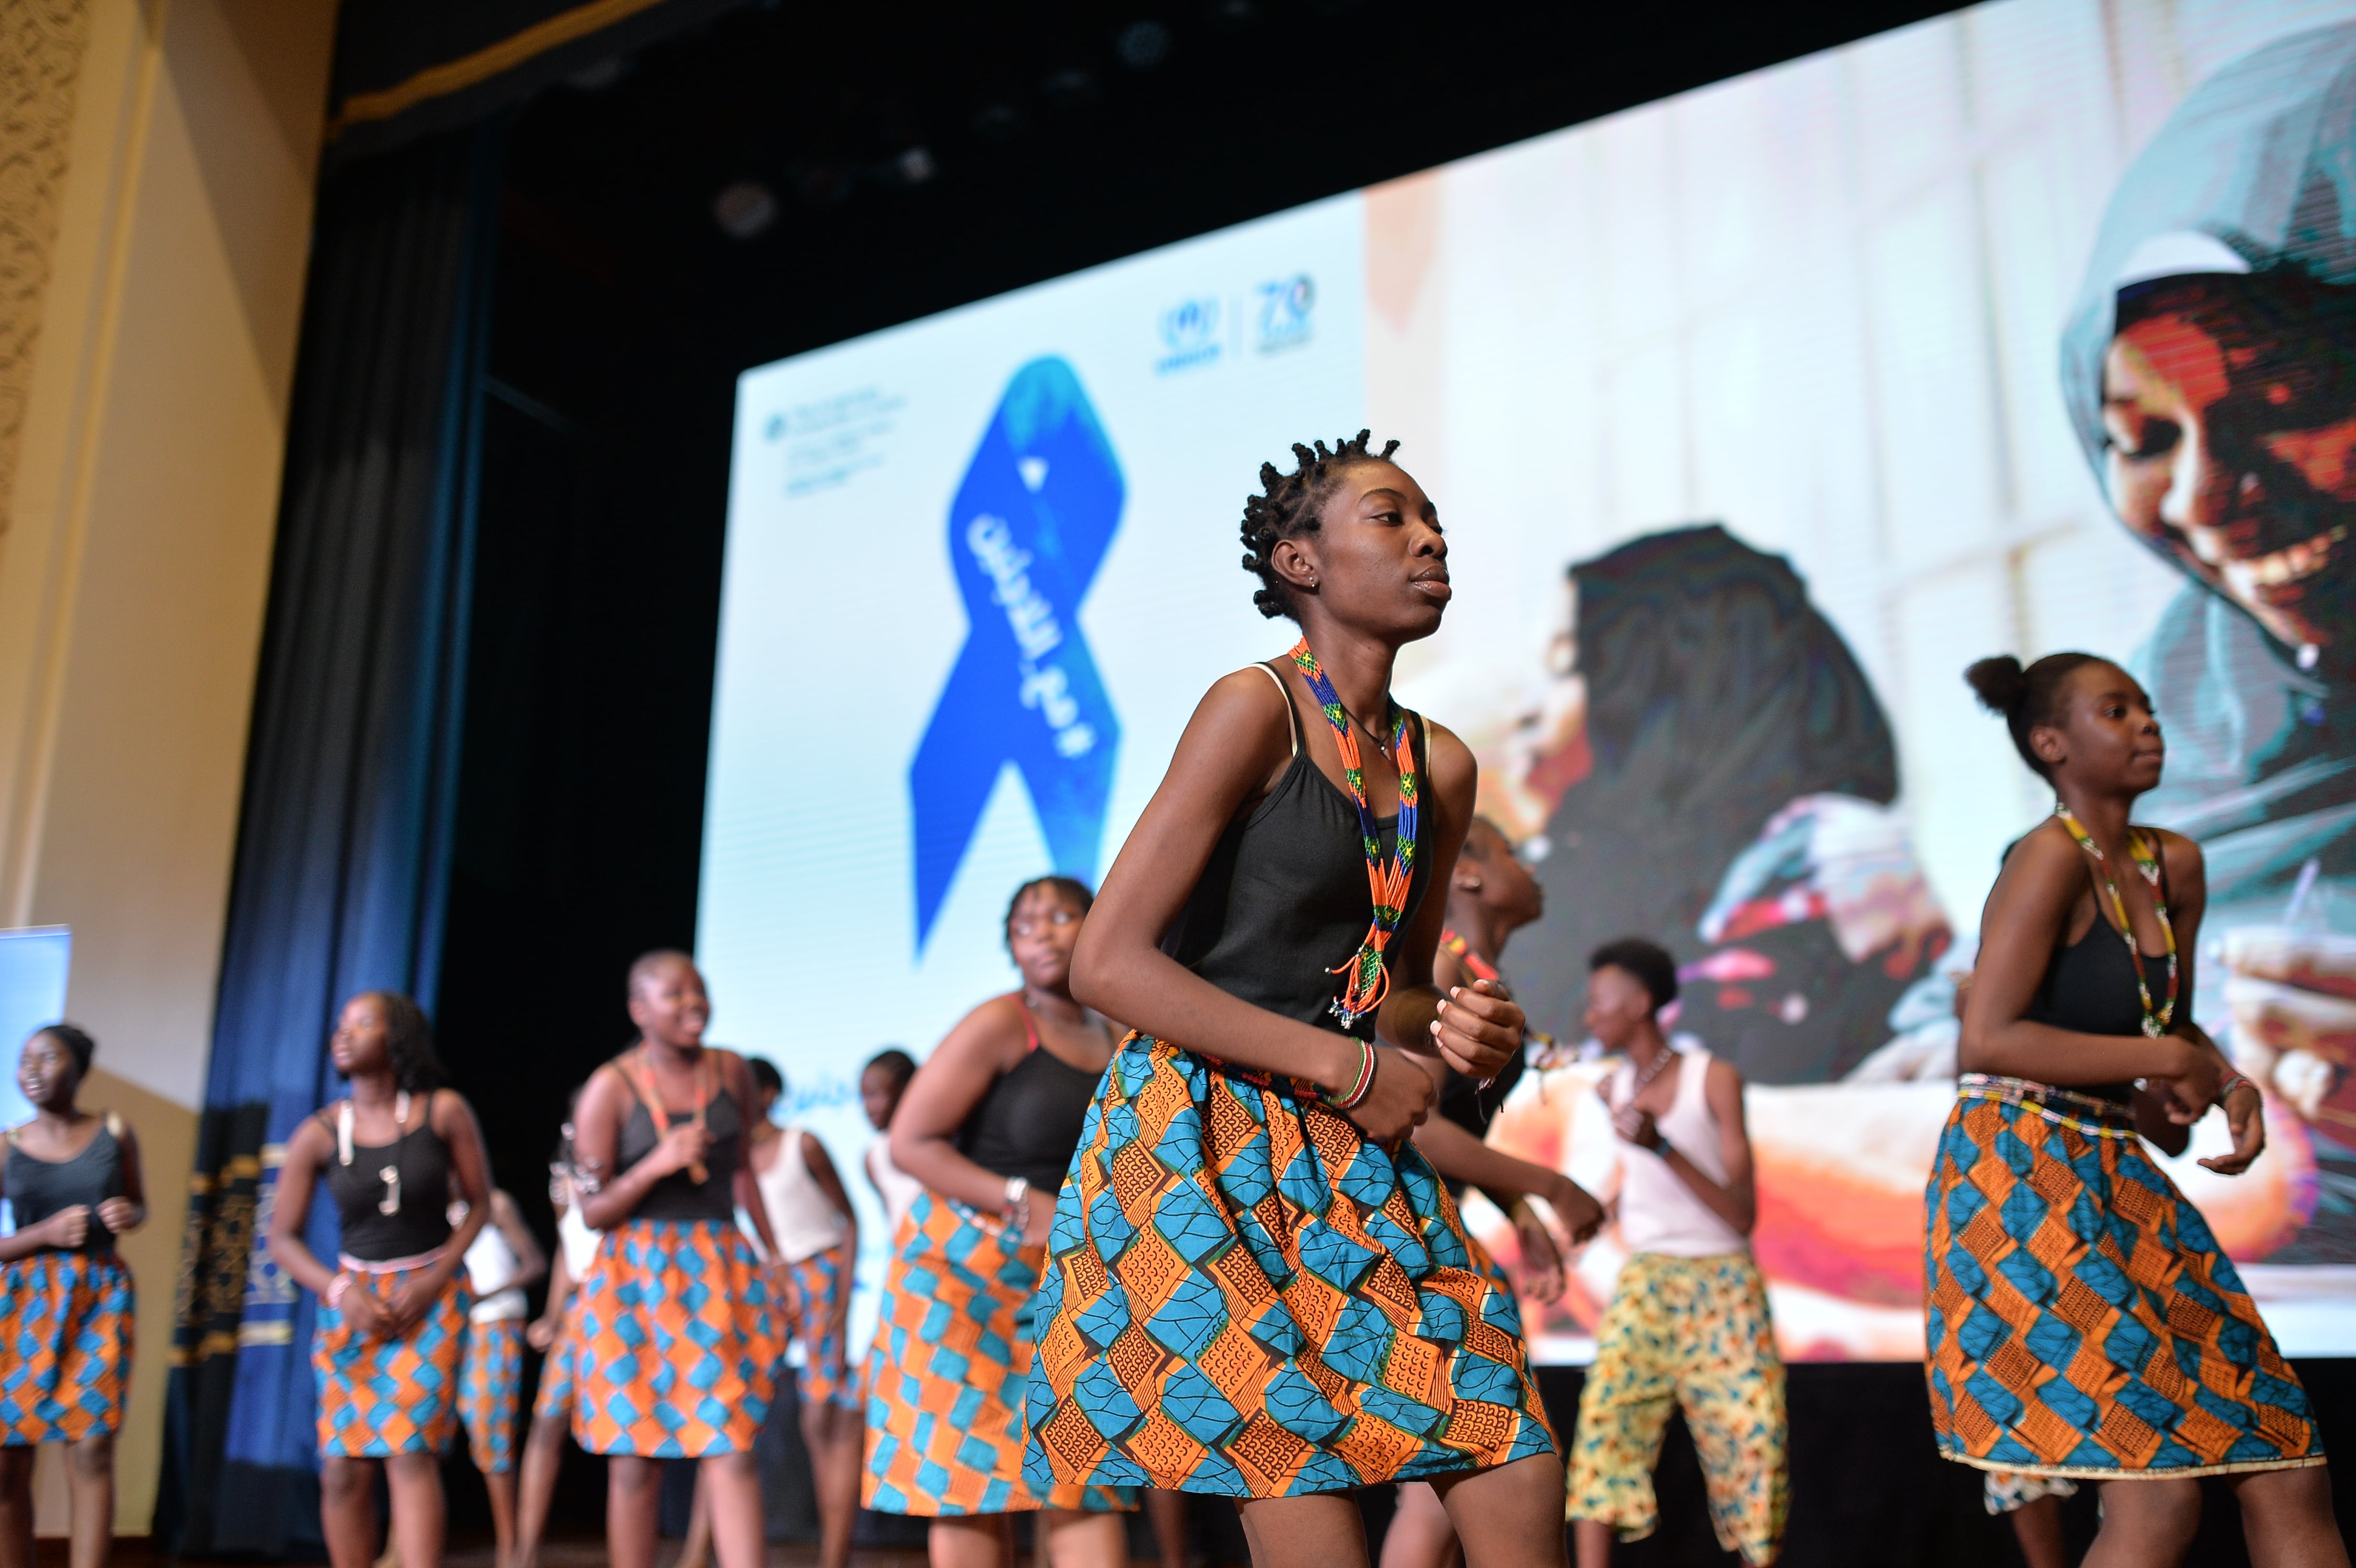 Dancers perform on stage in front of a large projection of a World Refugee Day ribbon.